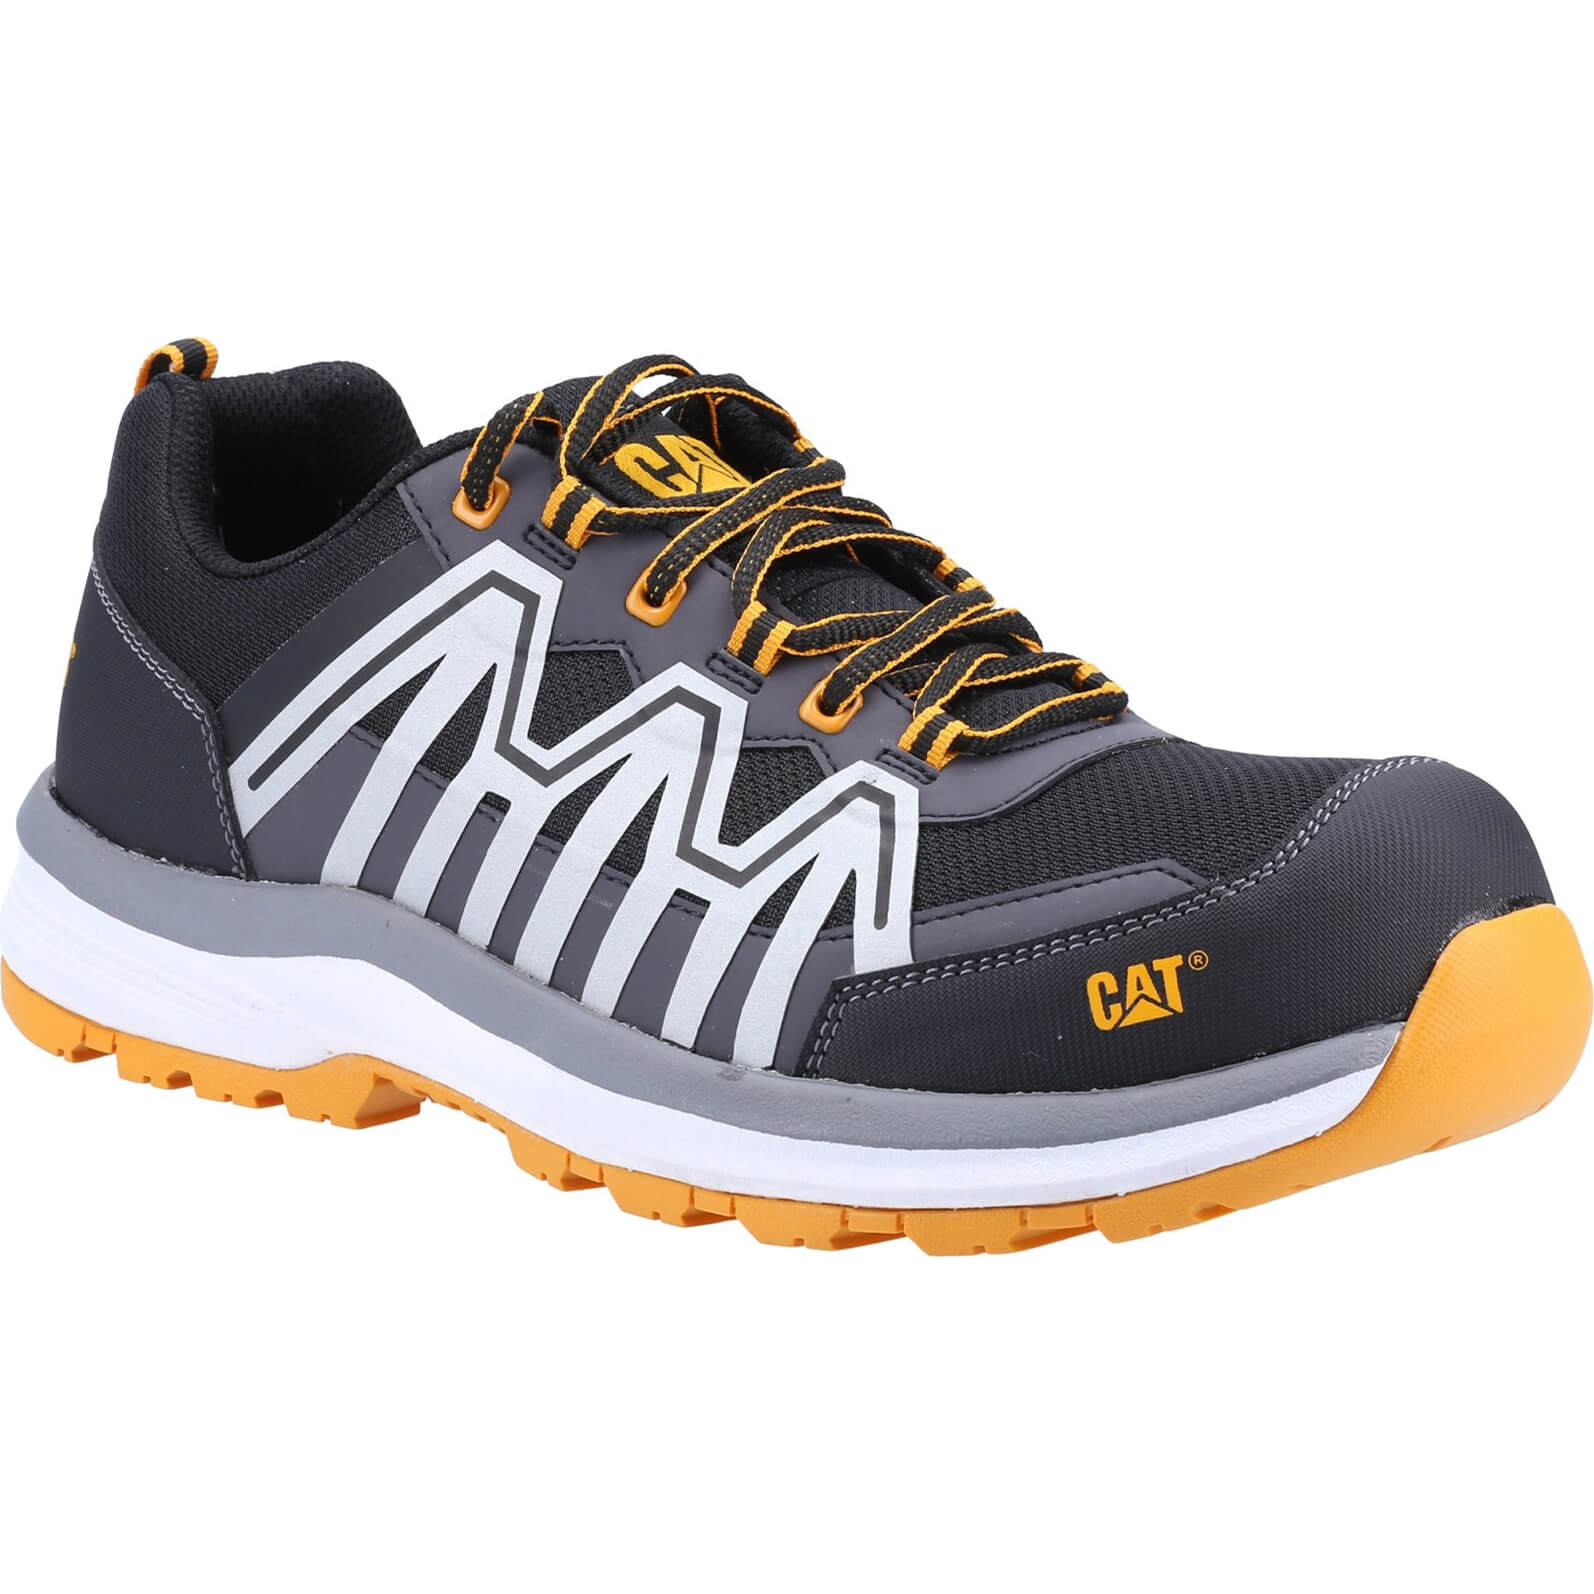 Image of Caterpillar Mens Charge S3 Safety Trainer Orange Size 6